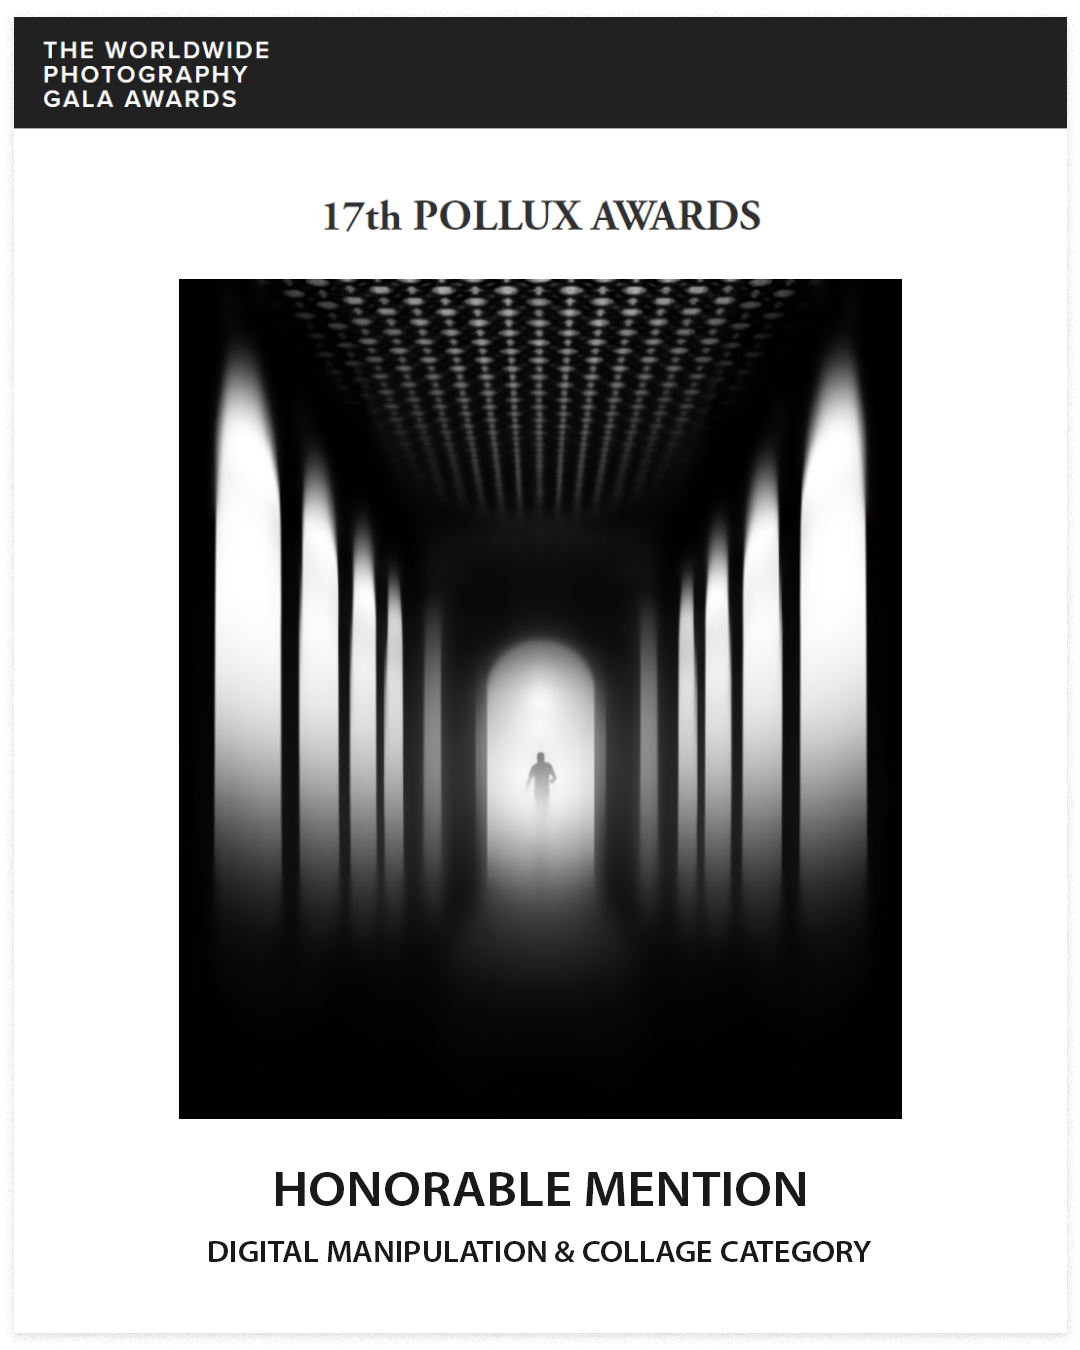 17th Pollux Awards: Honorable Mention in Digital Manipulation & Collage Category